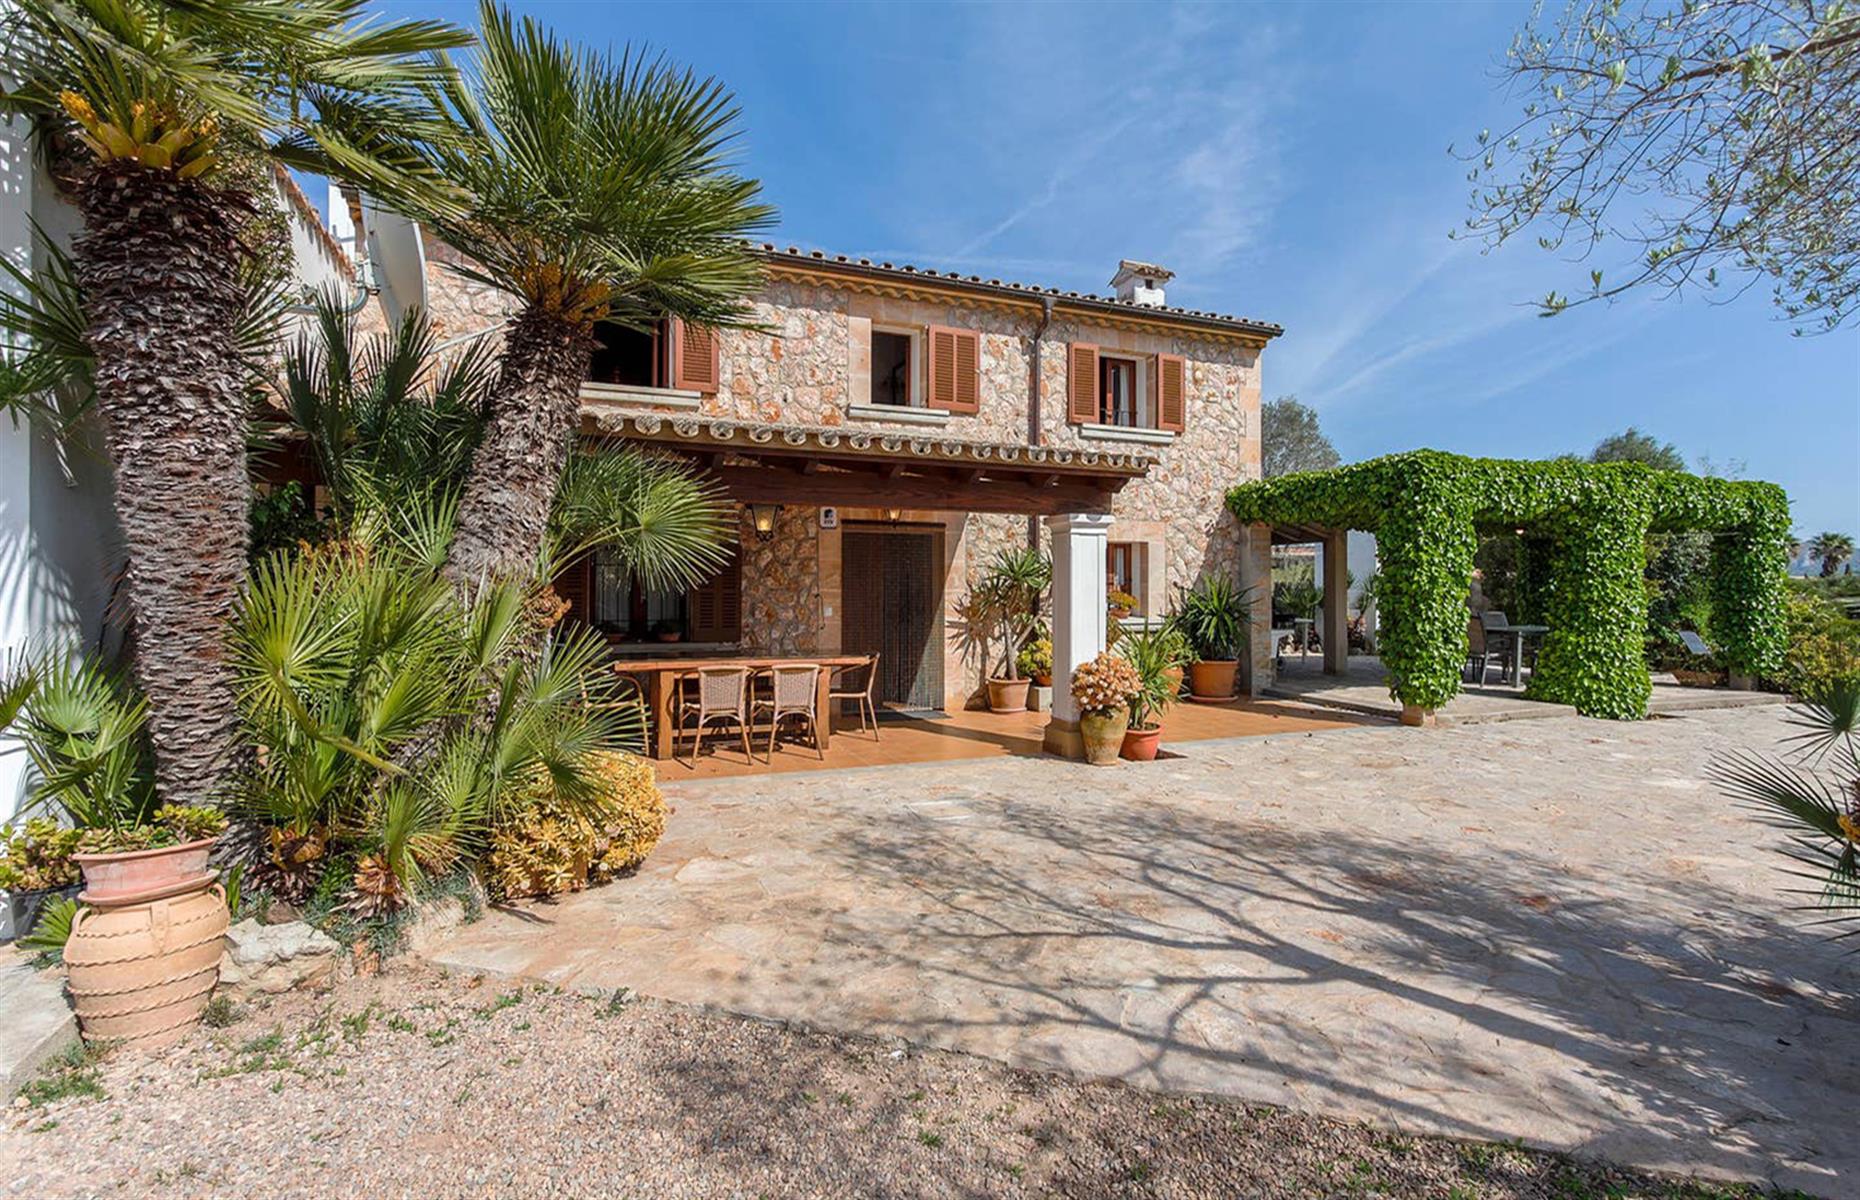 <p>An authentic Mallorcan finca (a Spanish rural cottage) is ideal for family vacations. <a href="https://www.airbnb.co.uk/rooms/1083358">This charming stone house</a> has three bedrooms, a swimming pool, an ivy-covered terrace with a large gas grill and a fully-equipped kitchen. The nearby Port of Pollença is great for restaurants, shops and the beach during summer while the island capital Palma de Mallorca is less than an hour away. Discover <a href="http://www.loveexploring.com/galleries/102602/airbnbs-with-the-most-beautiful-views">Airbnbs with the most beautiful views</a>.</p>